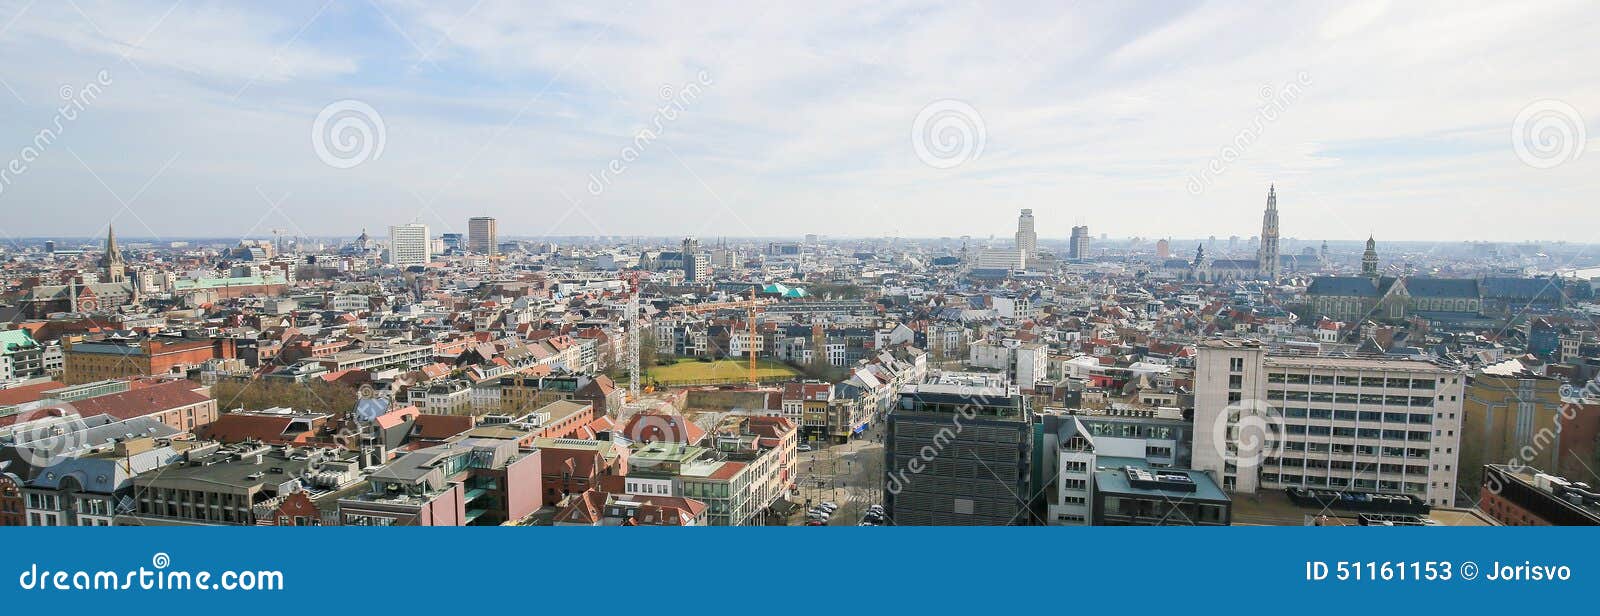 Aerial View On The Center Of Antwerp, Belgium Stock Image ...